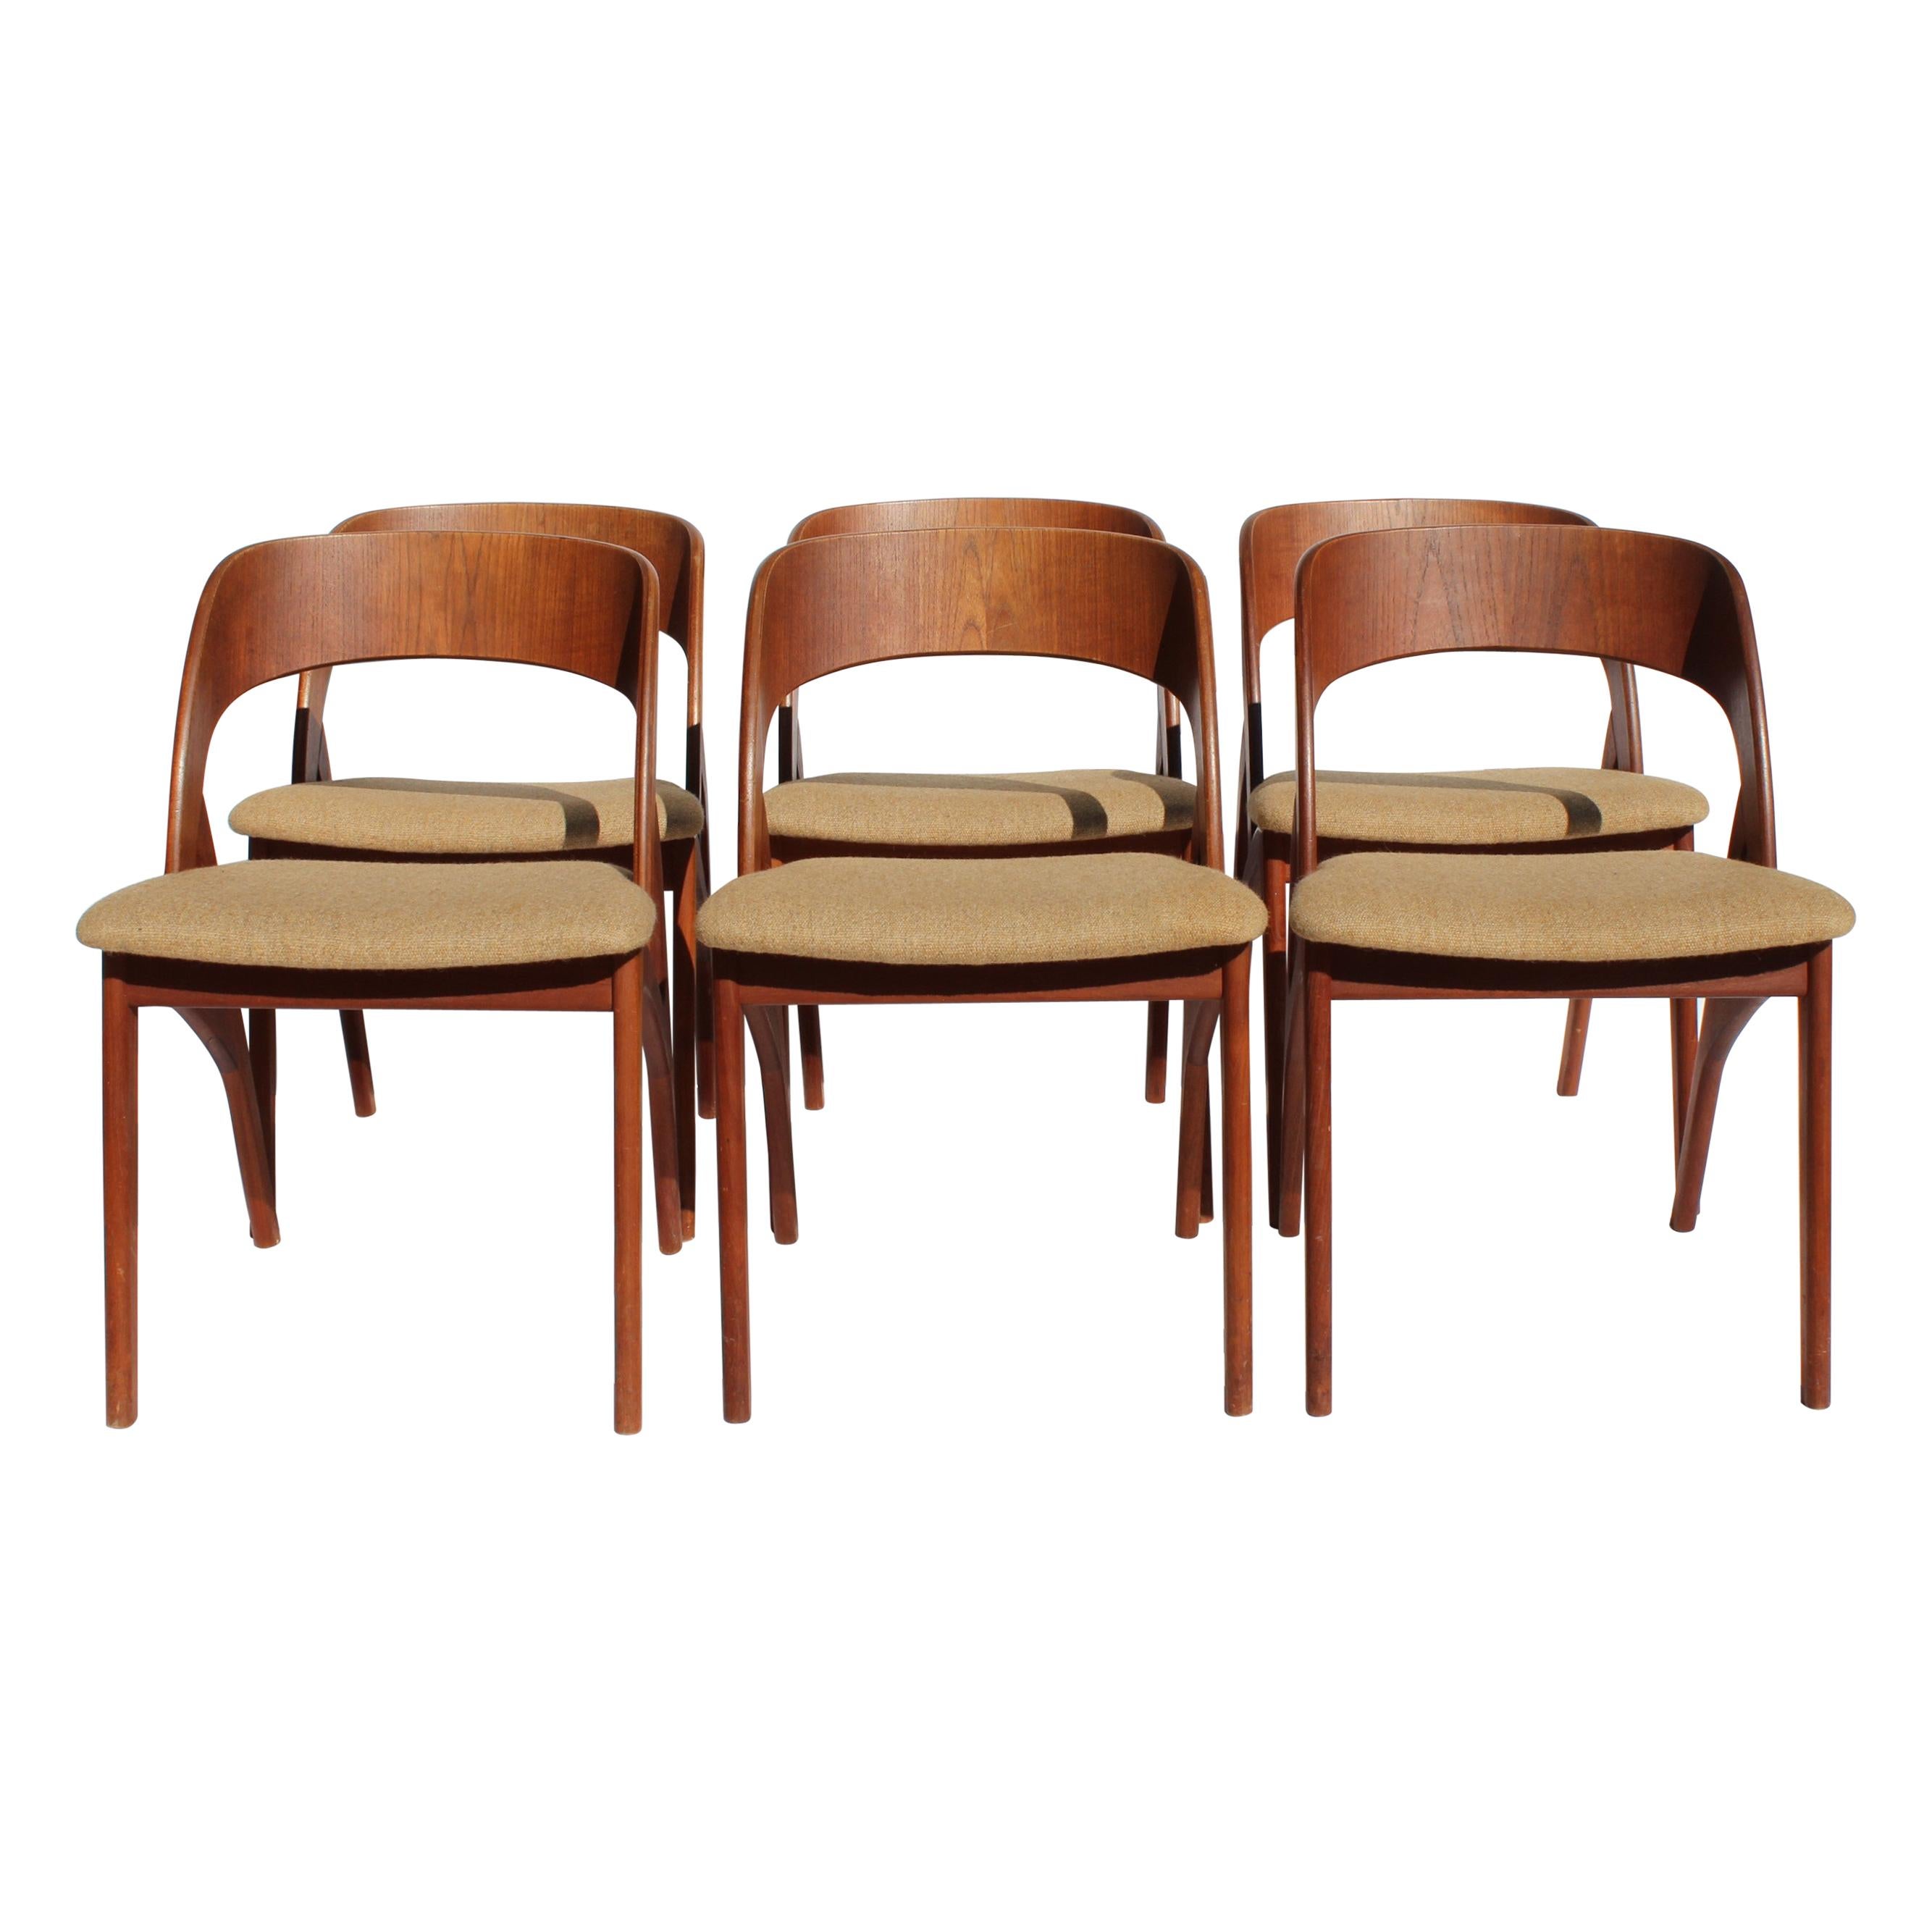 Set of Six Dining Room Chairs in Teak and Light Fabric of Danish Design, 1960s